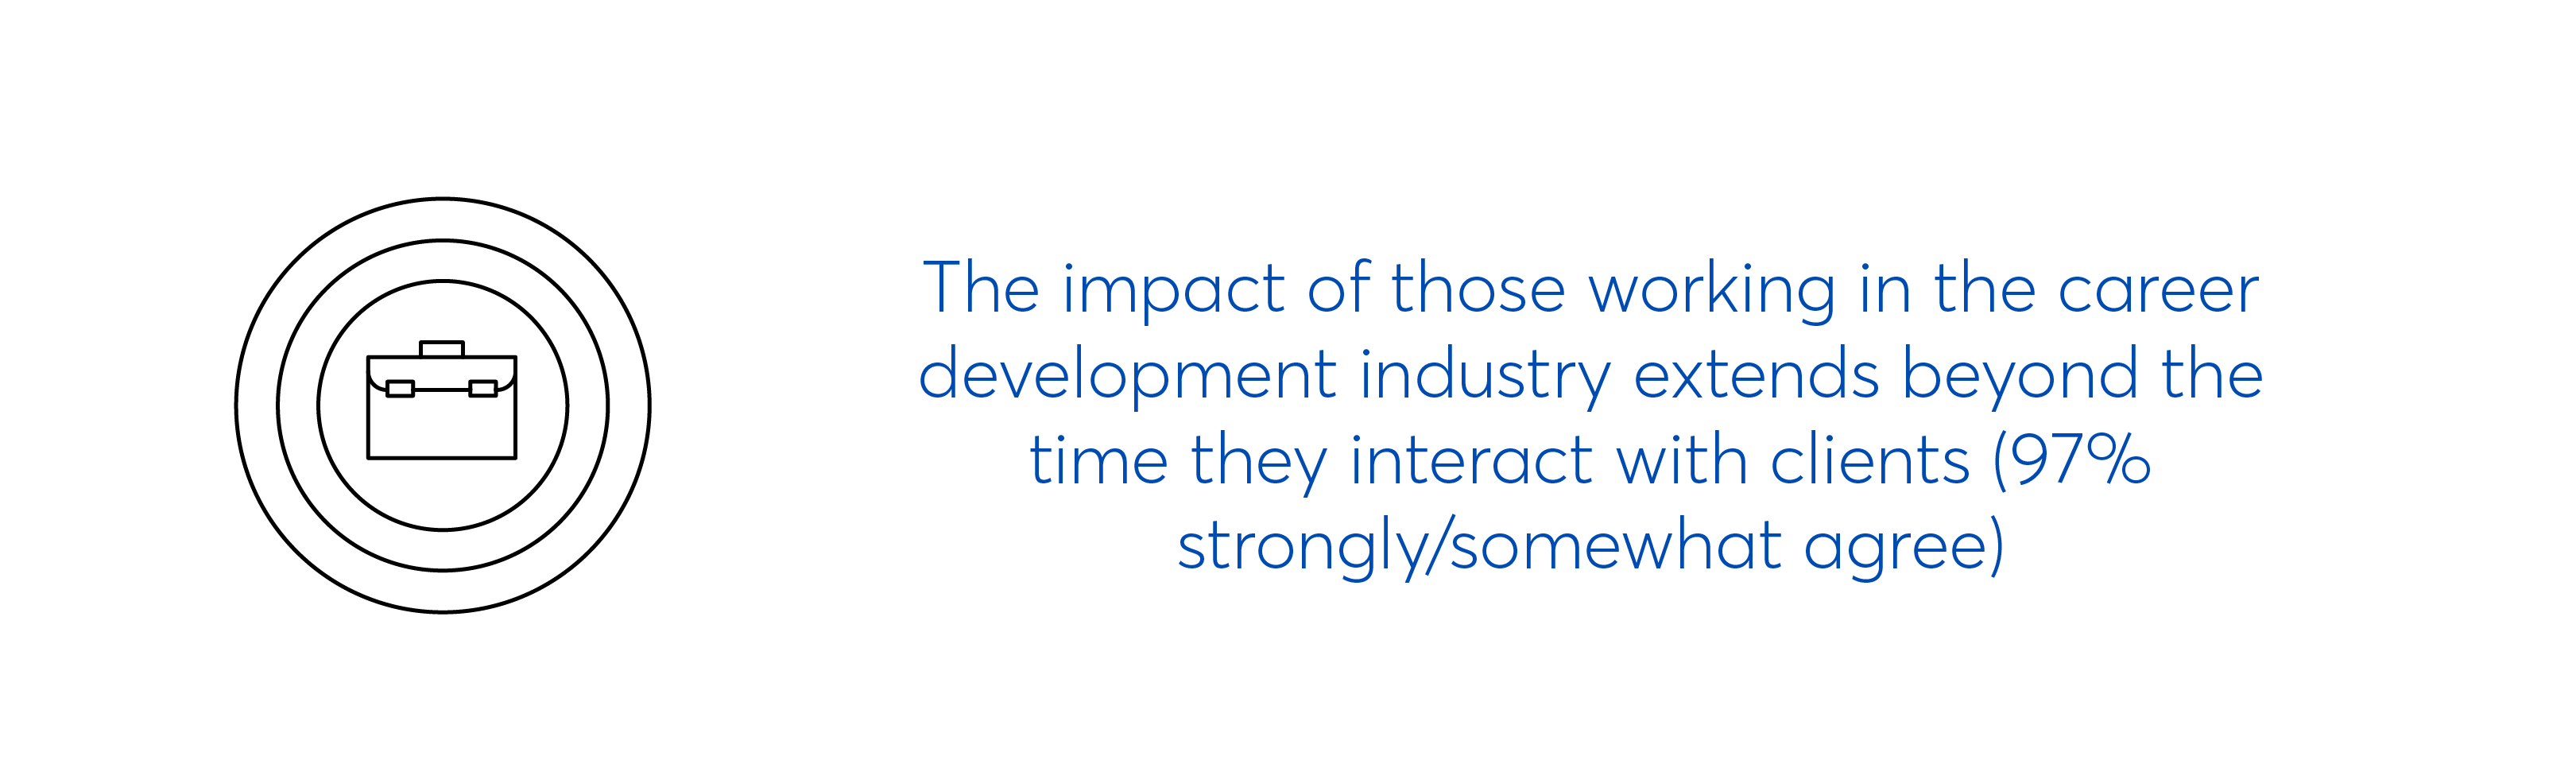 The impact of the career extends beyond the tme they interact with clients development industry